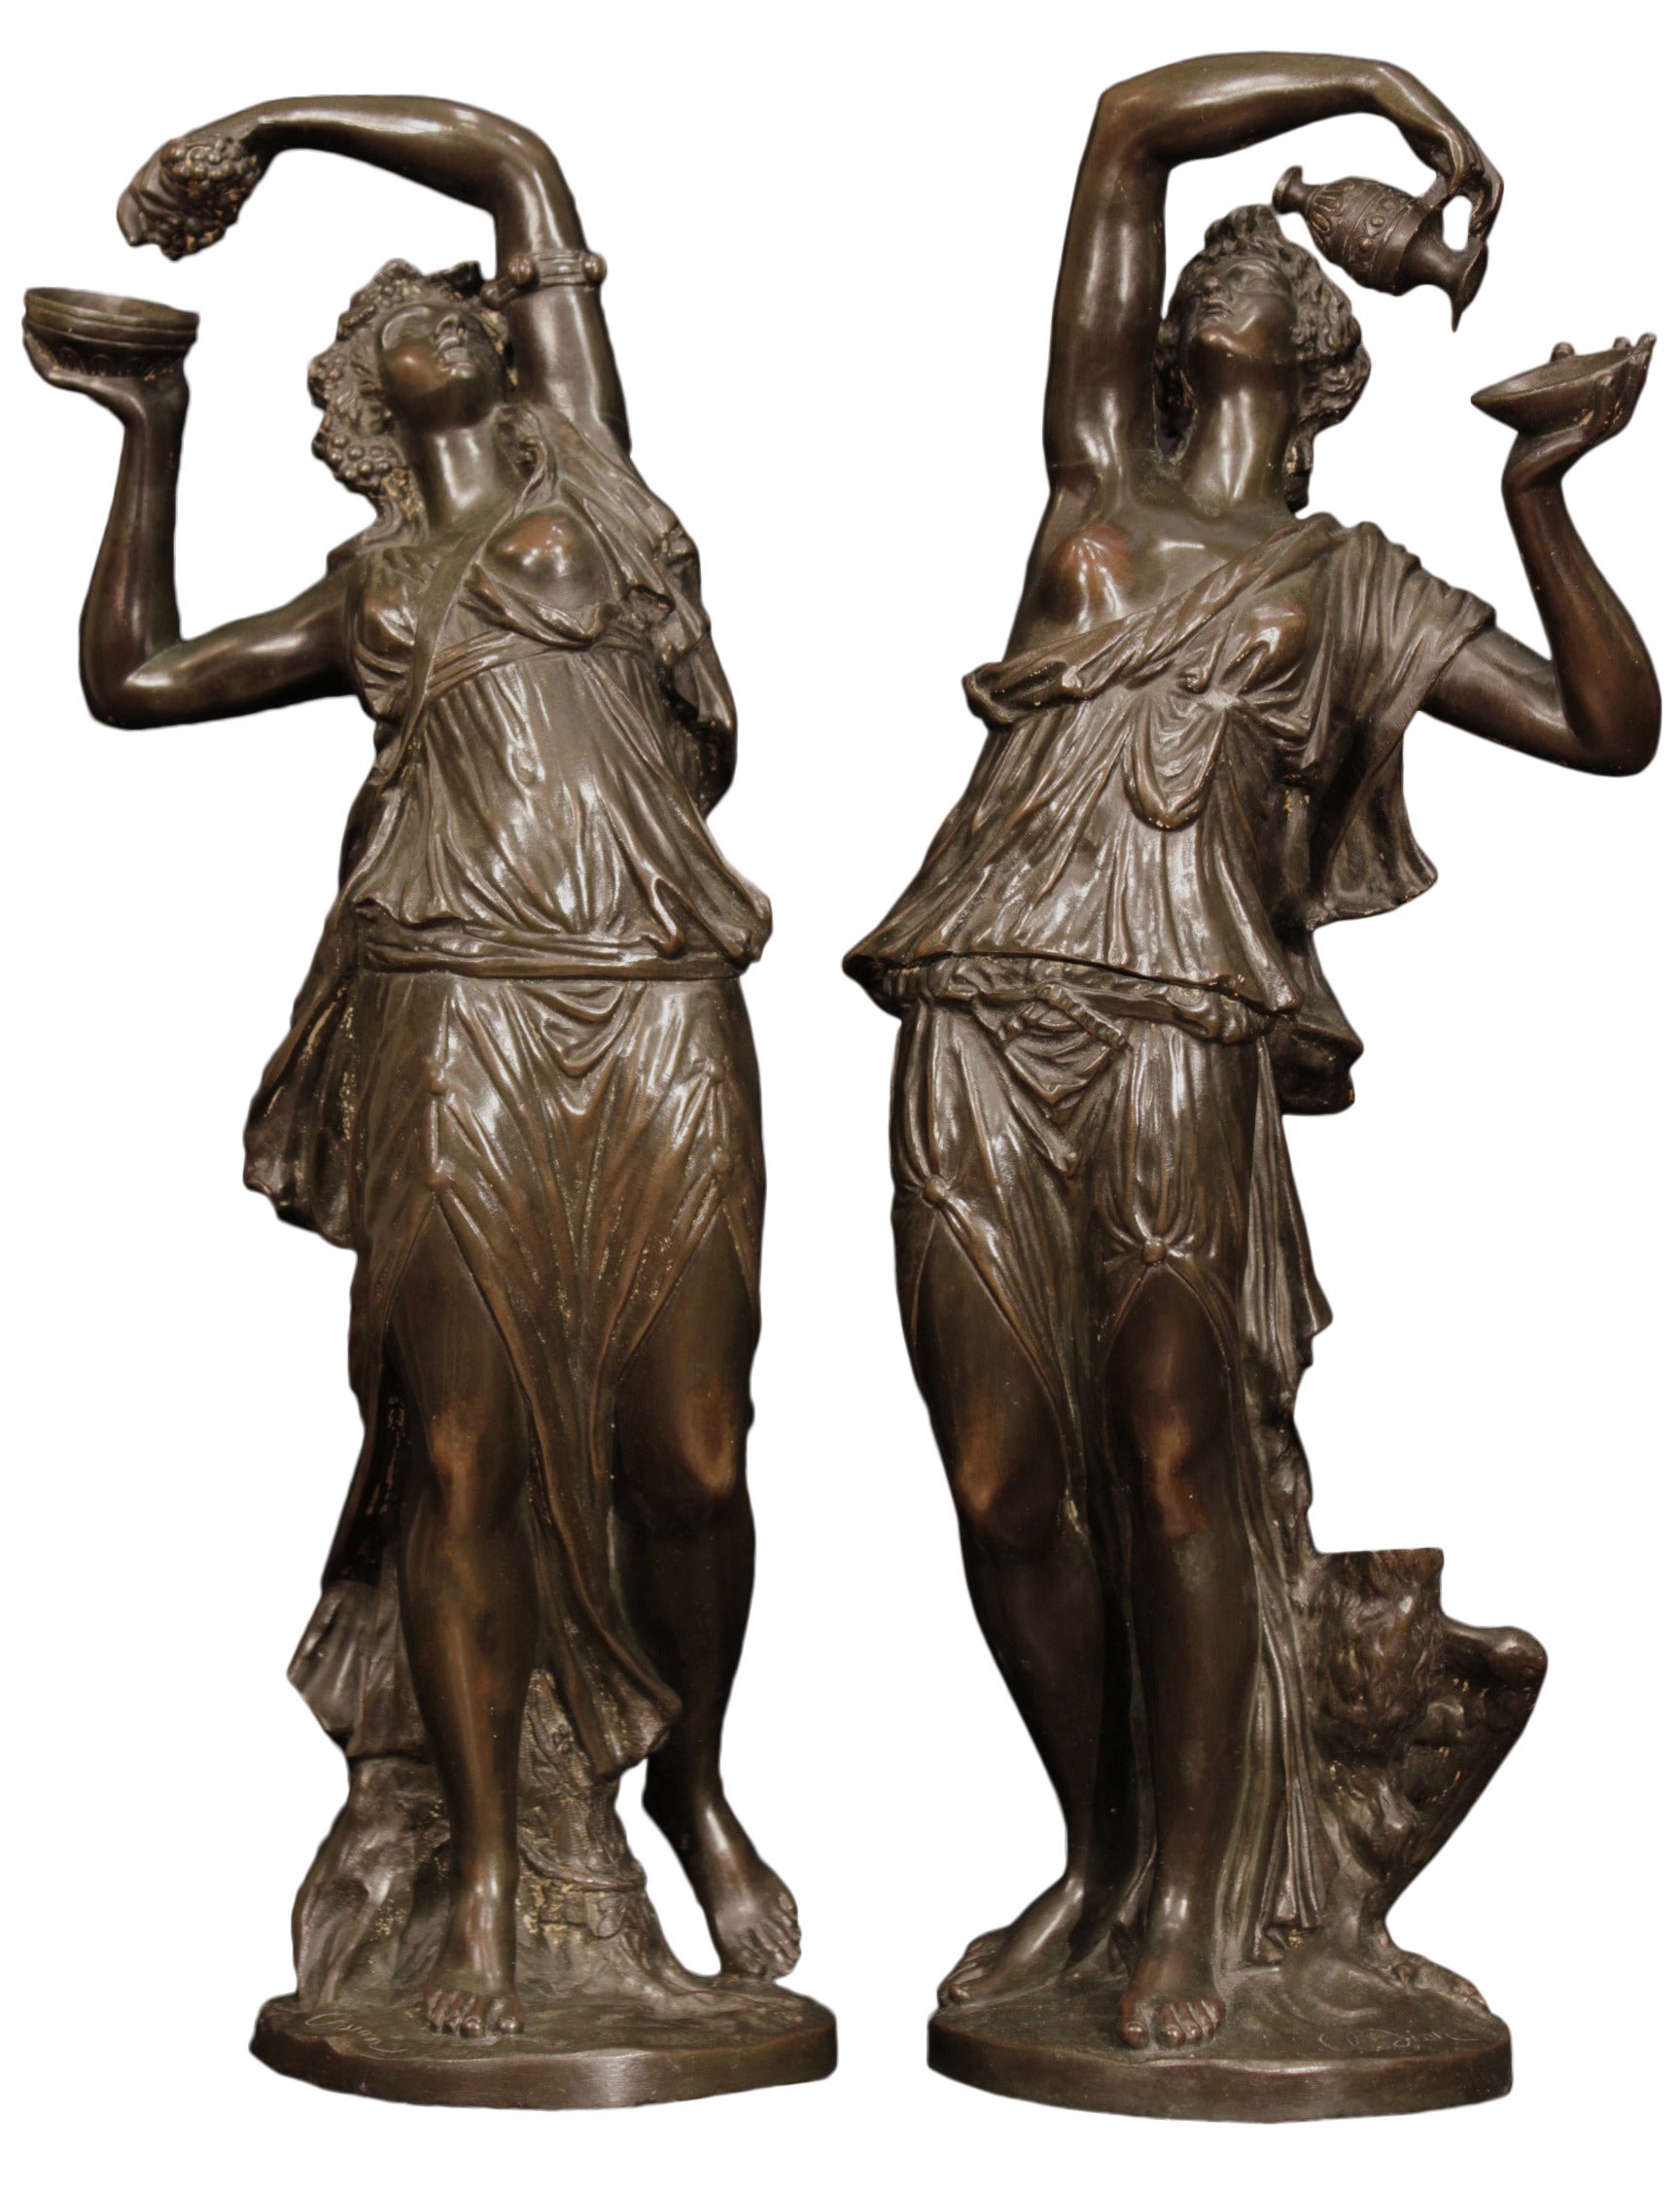 Pair Of Elegant and High Quality French Patinated Bronzes Signed Clodion